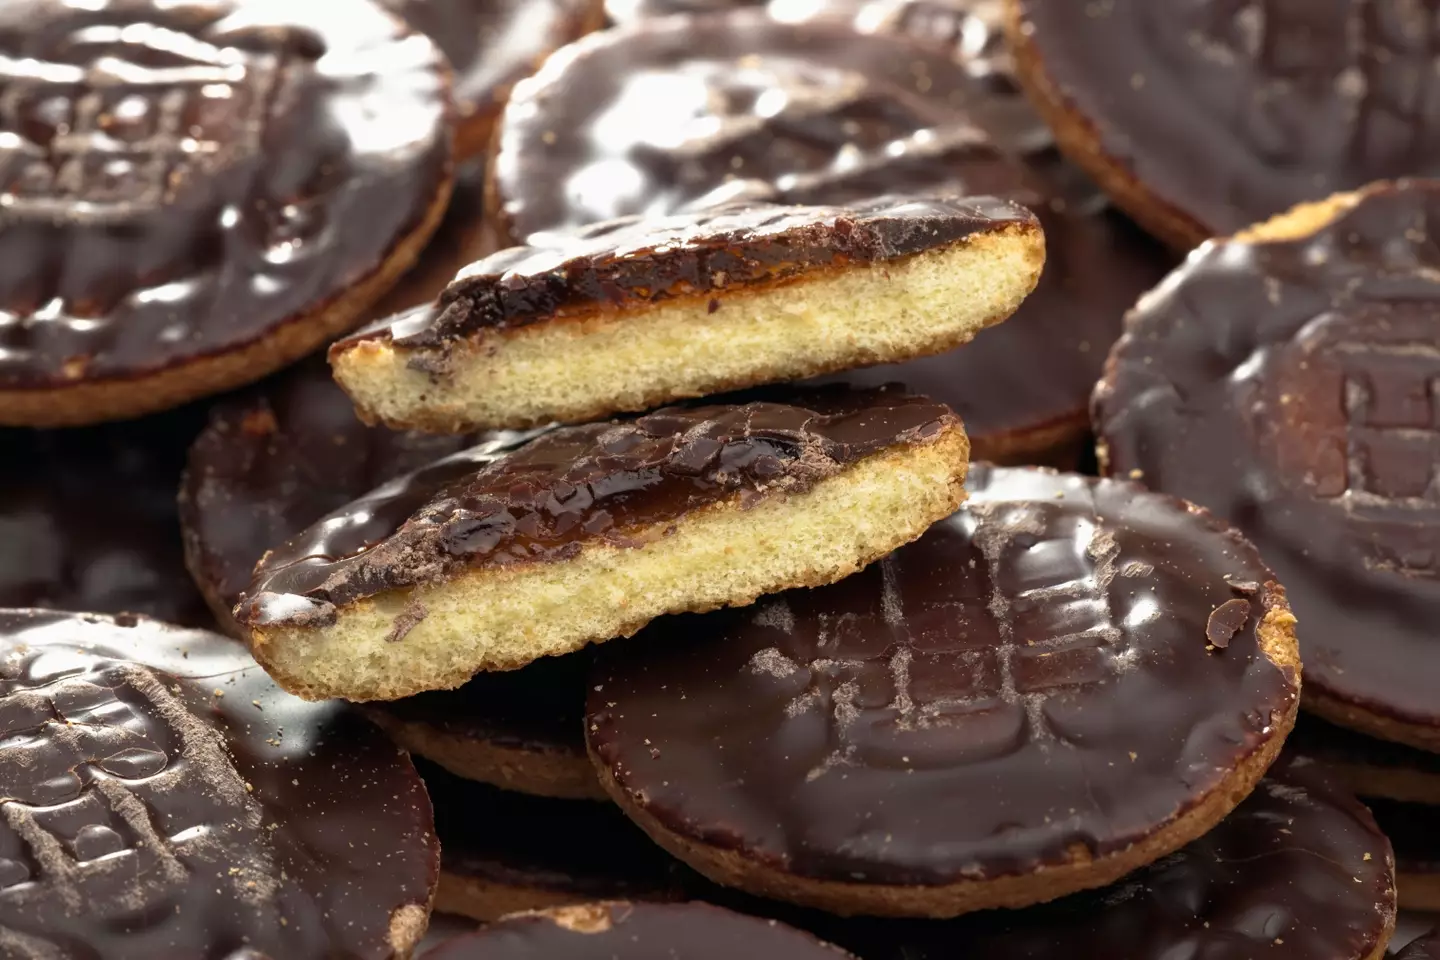 Women on social media say they would feel safer if they were a Jaffa Cake (